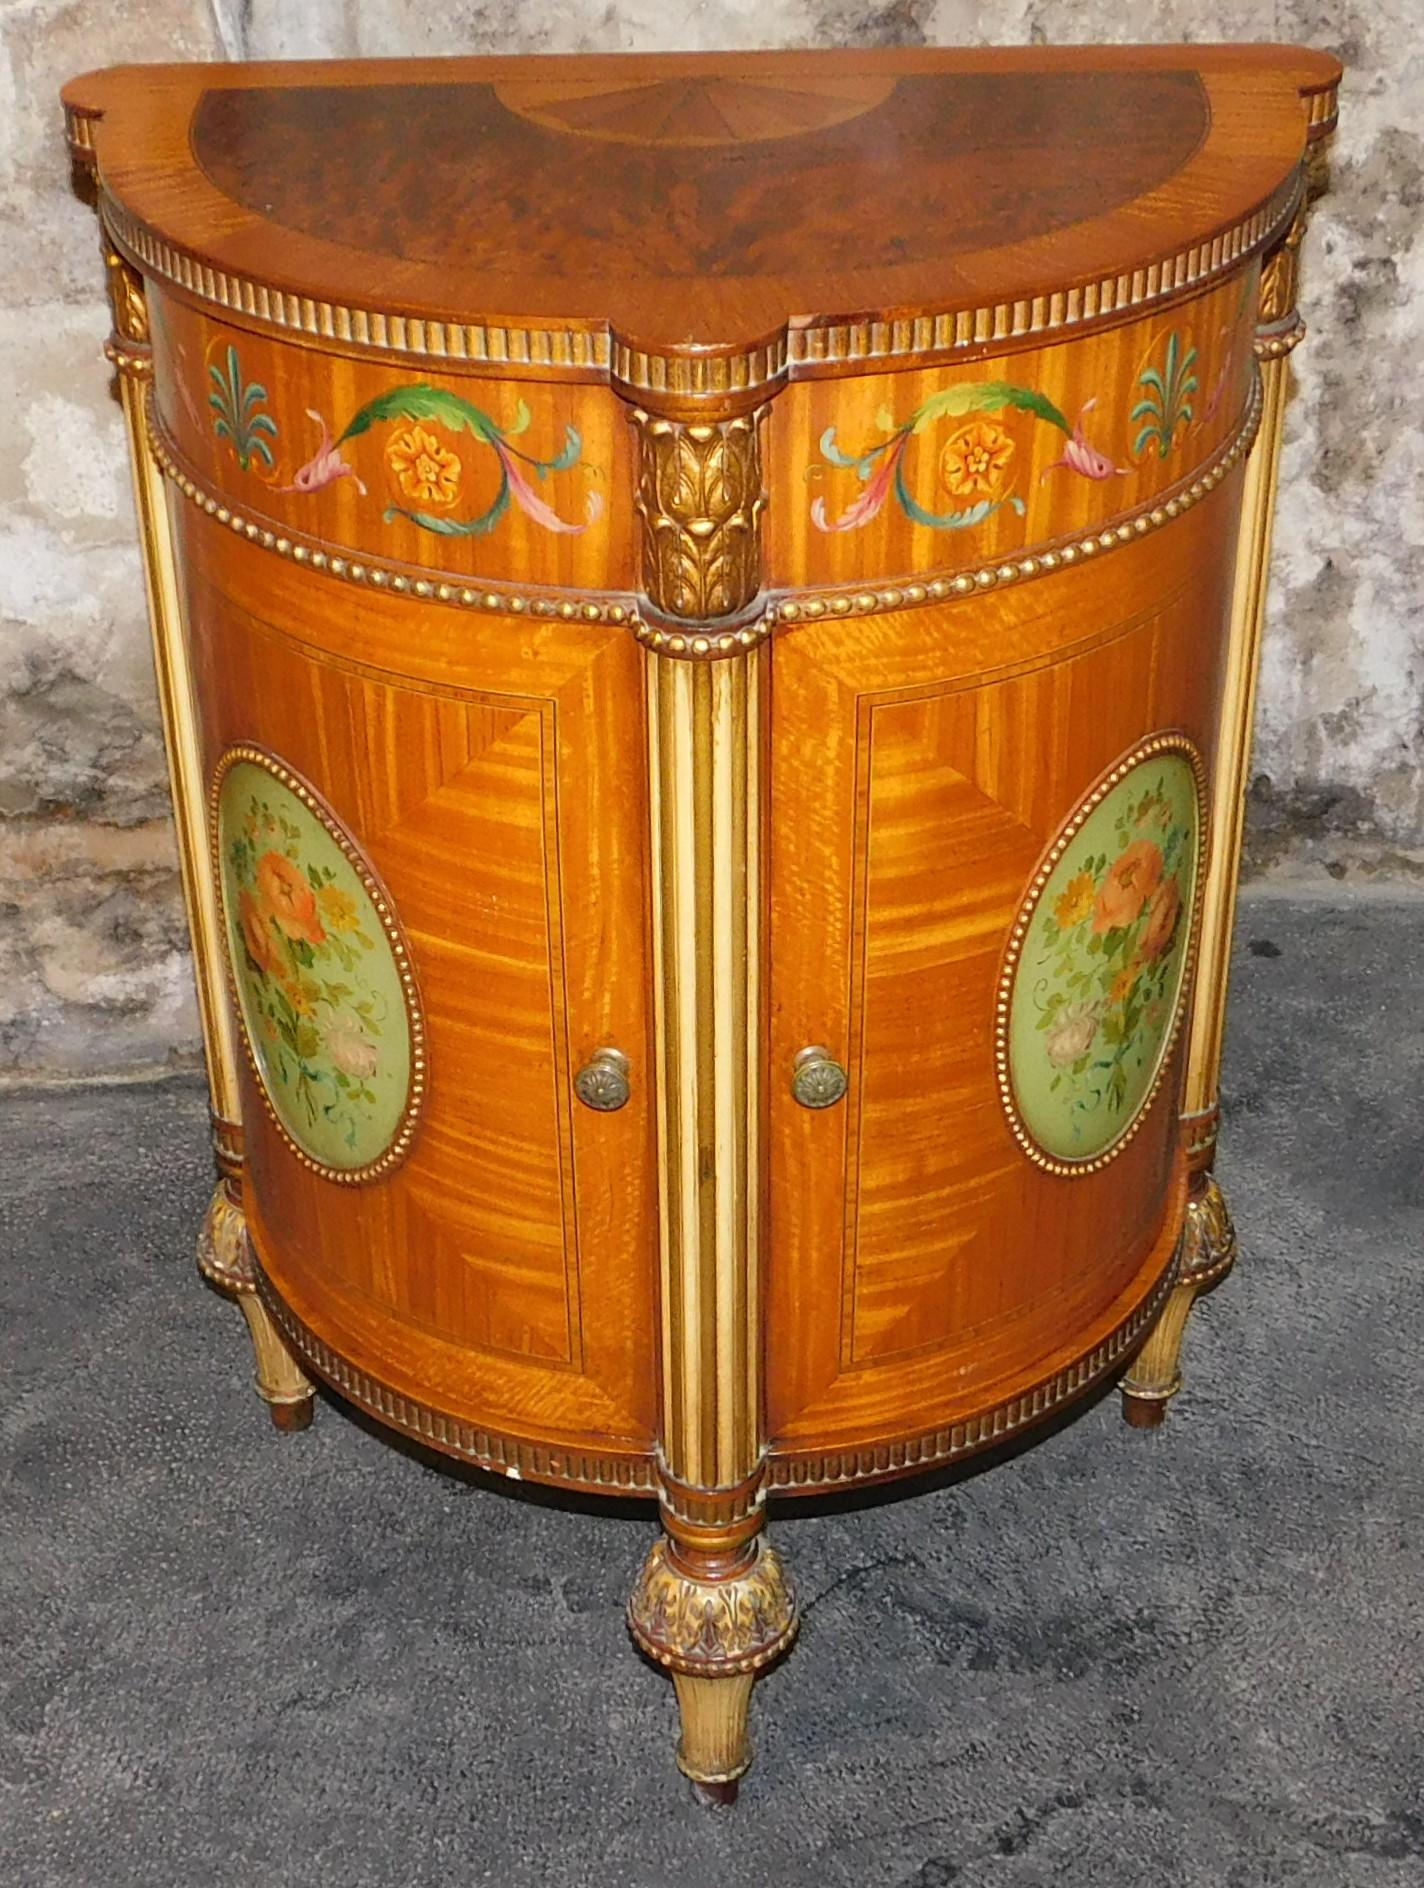 A beautiful circa 1890 mahogany, maple, burled walnut, satinwood inlaid English Sheraton Revival demilune side cabinet with neoclassical paintings. Hand painted with various veneers and double doors.